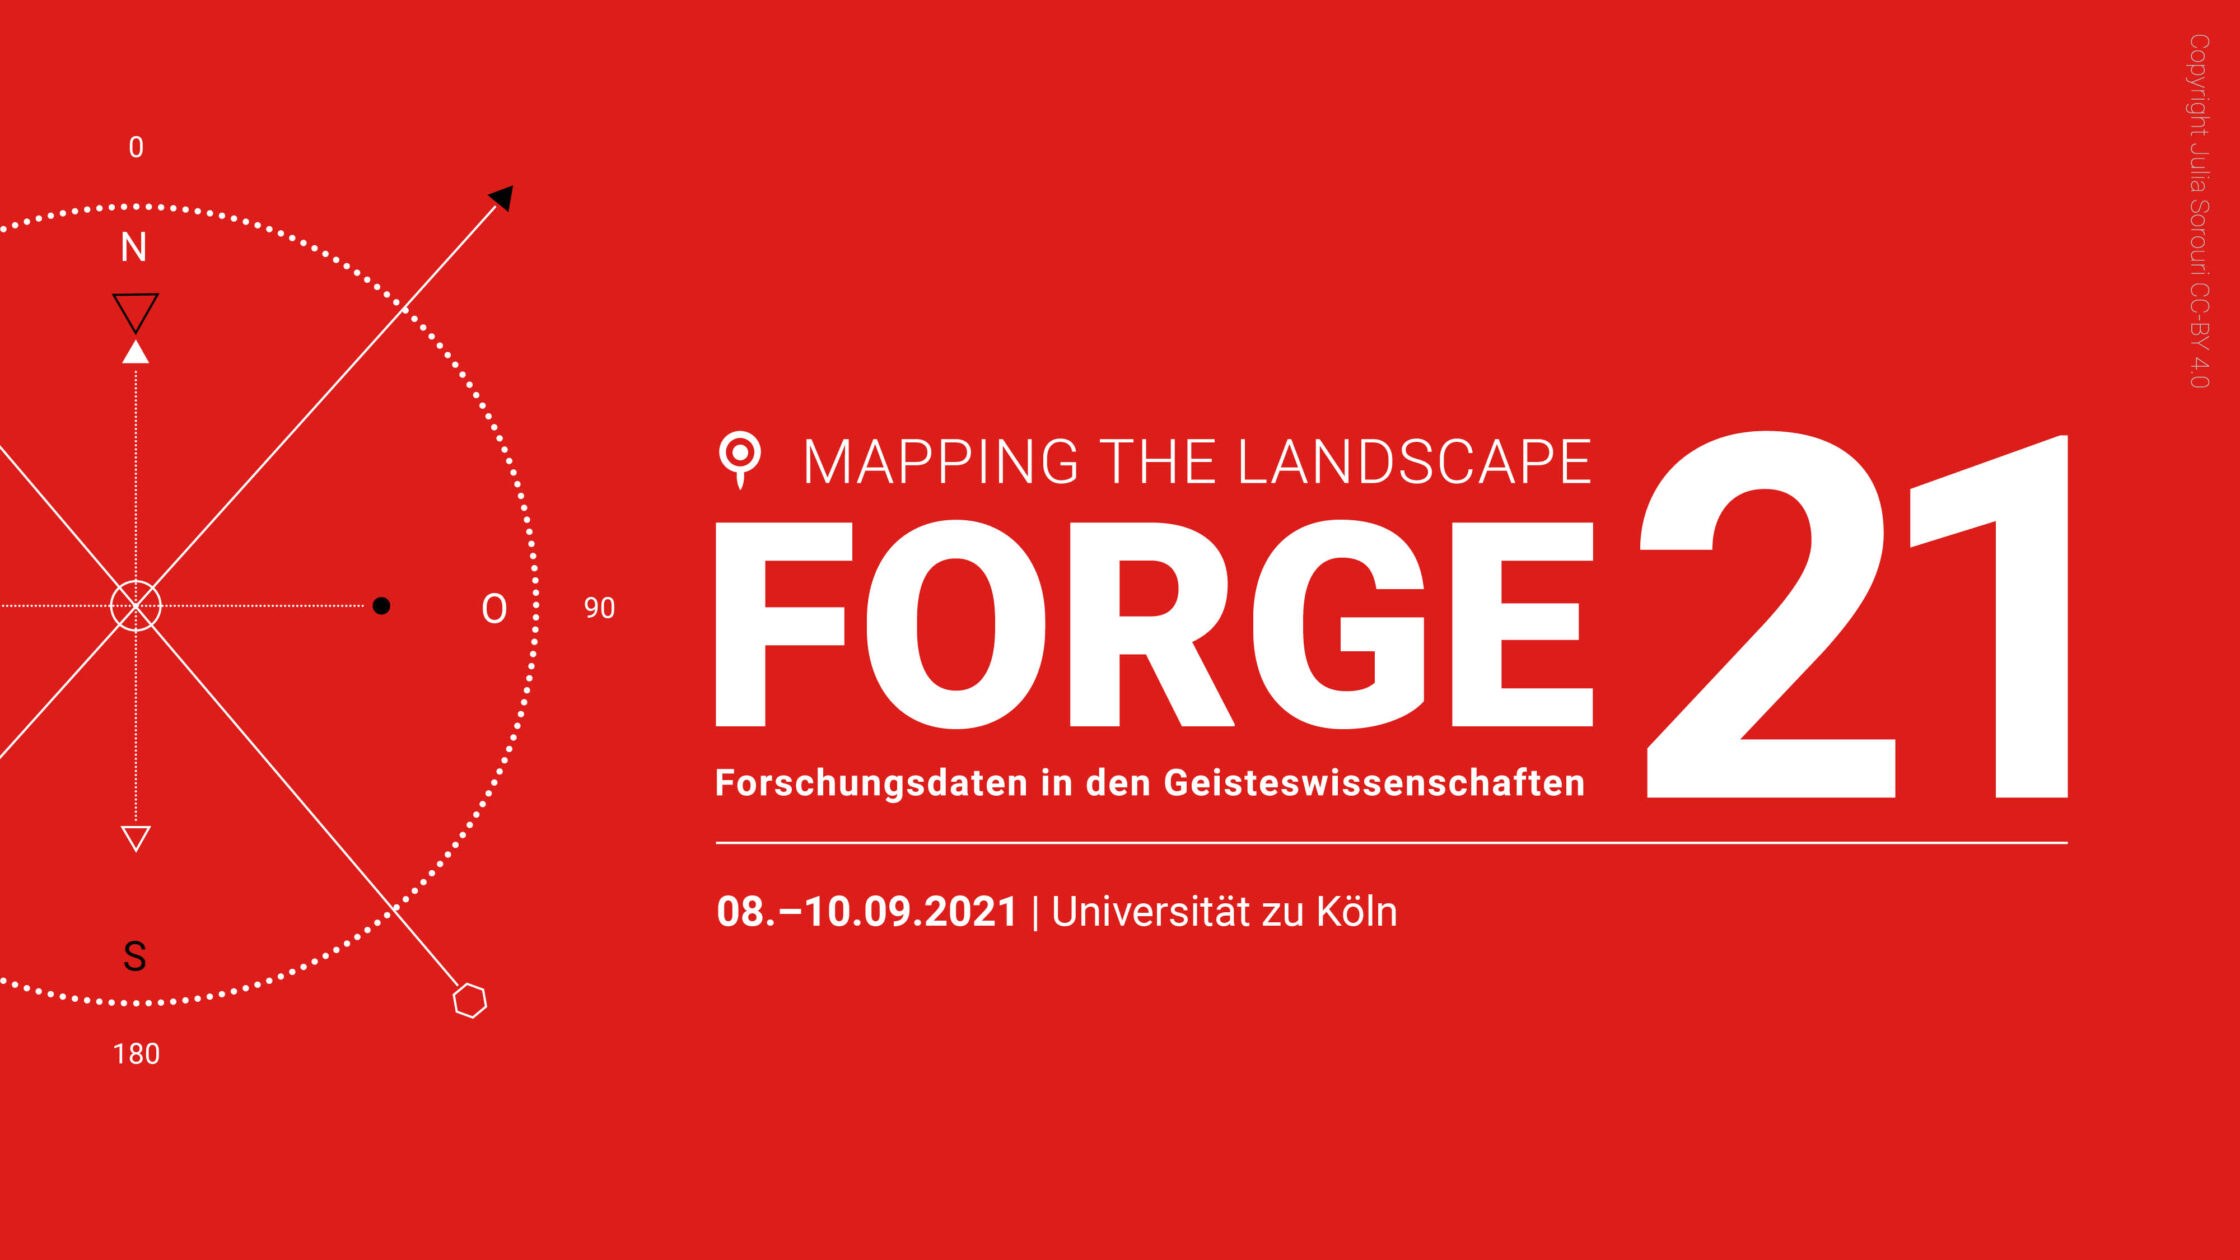 red image with white script advertising the FORGE 2021 conference